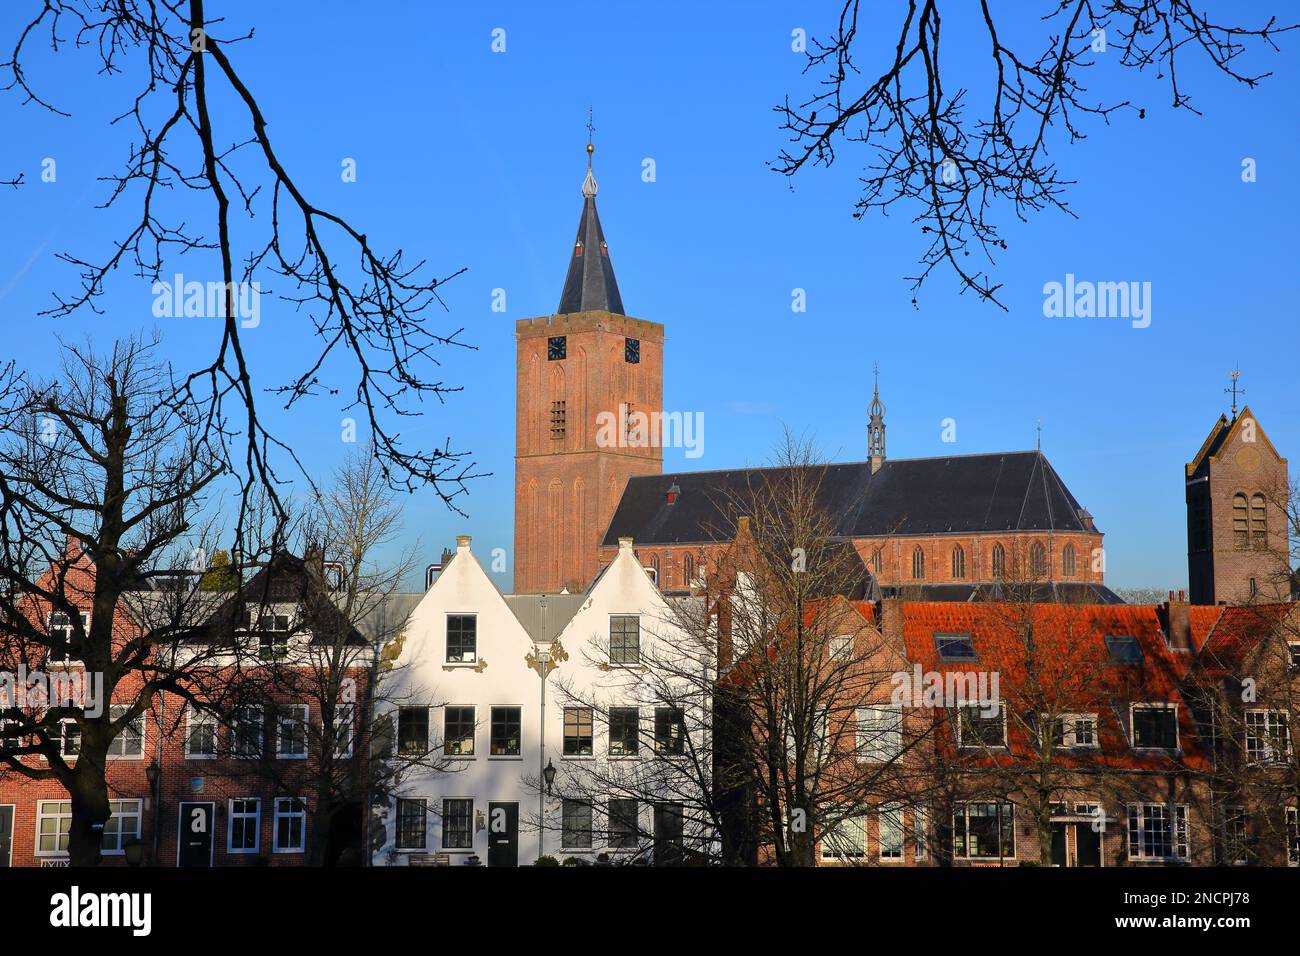 Historic houses located inside the fortified town of Naarden, Netherlands Stock Photo